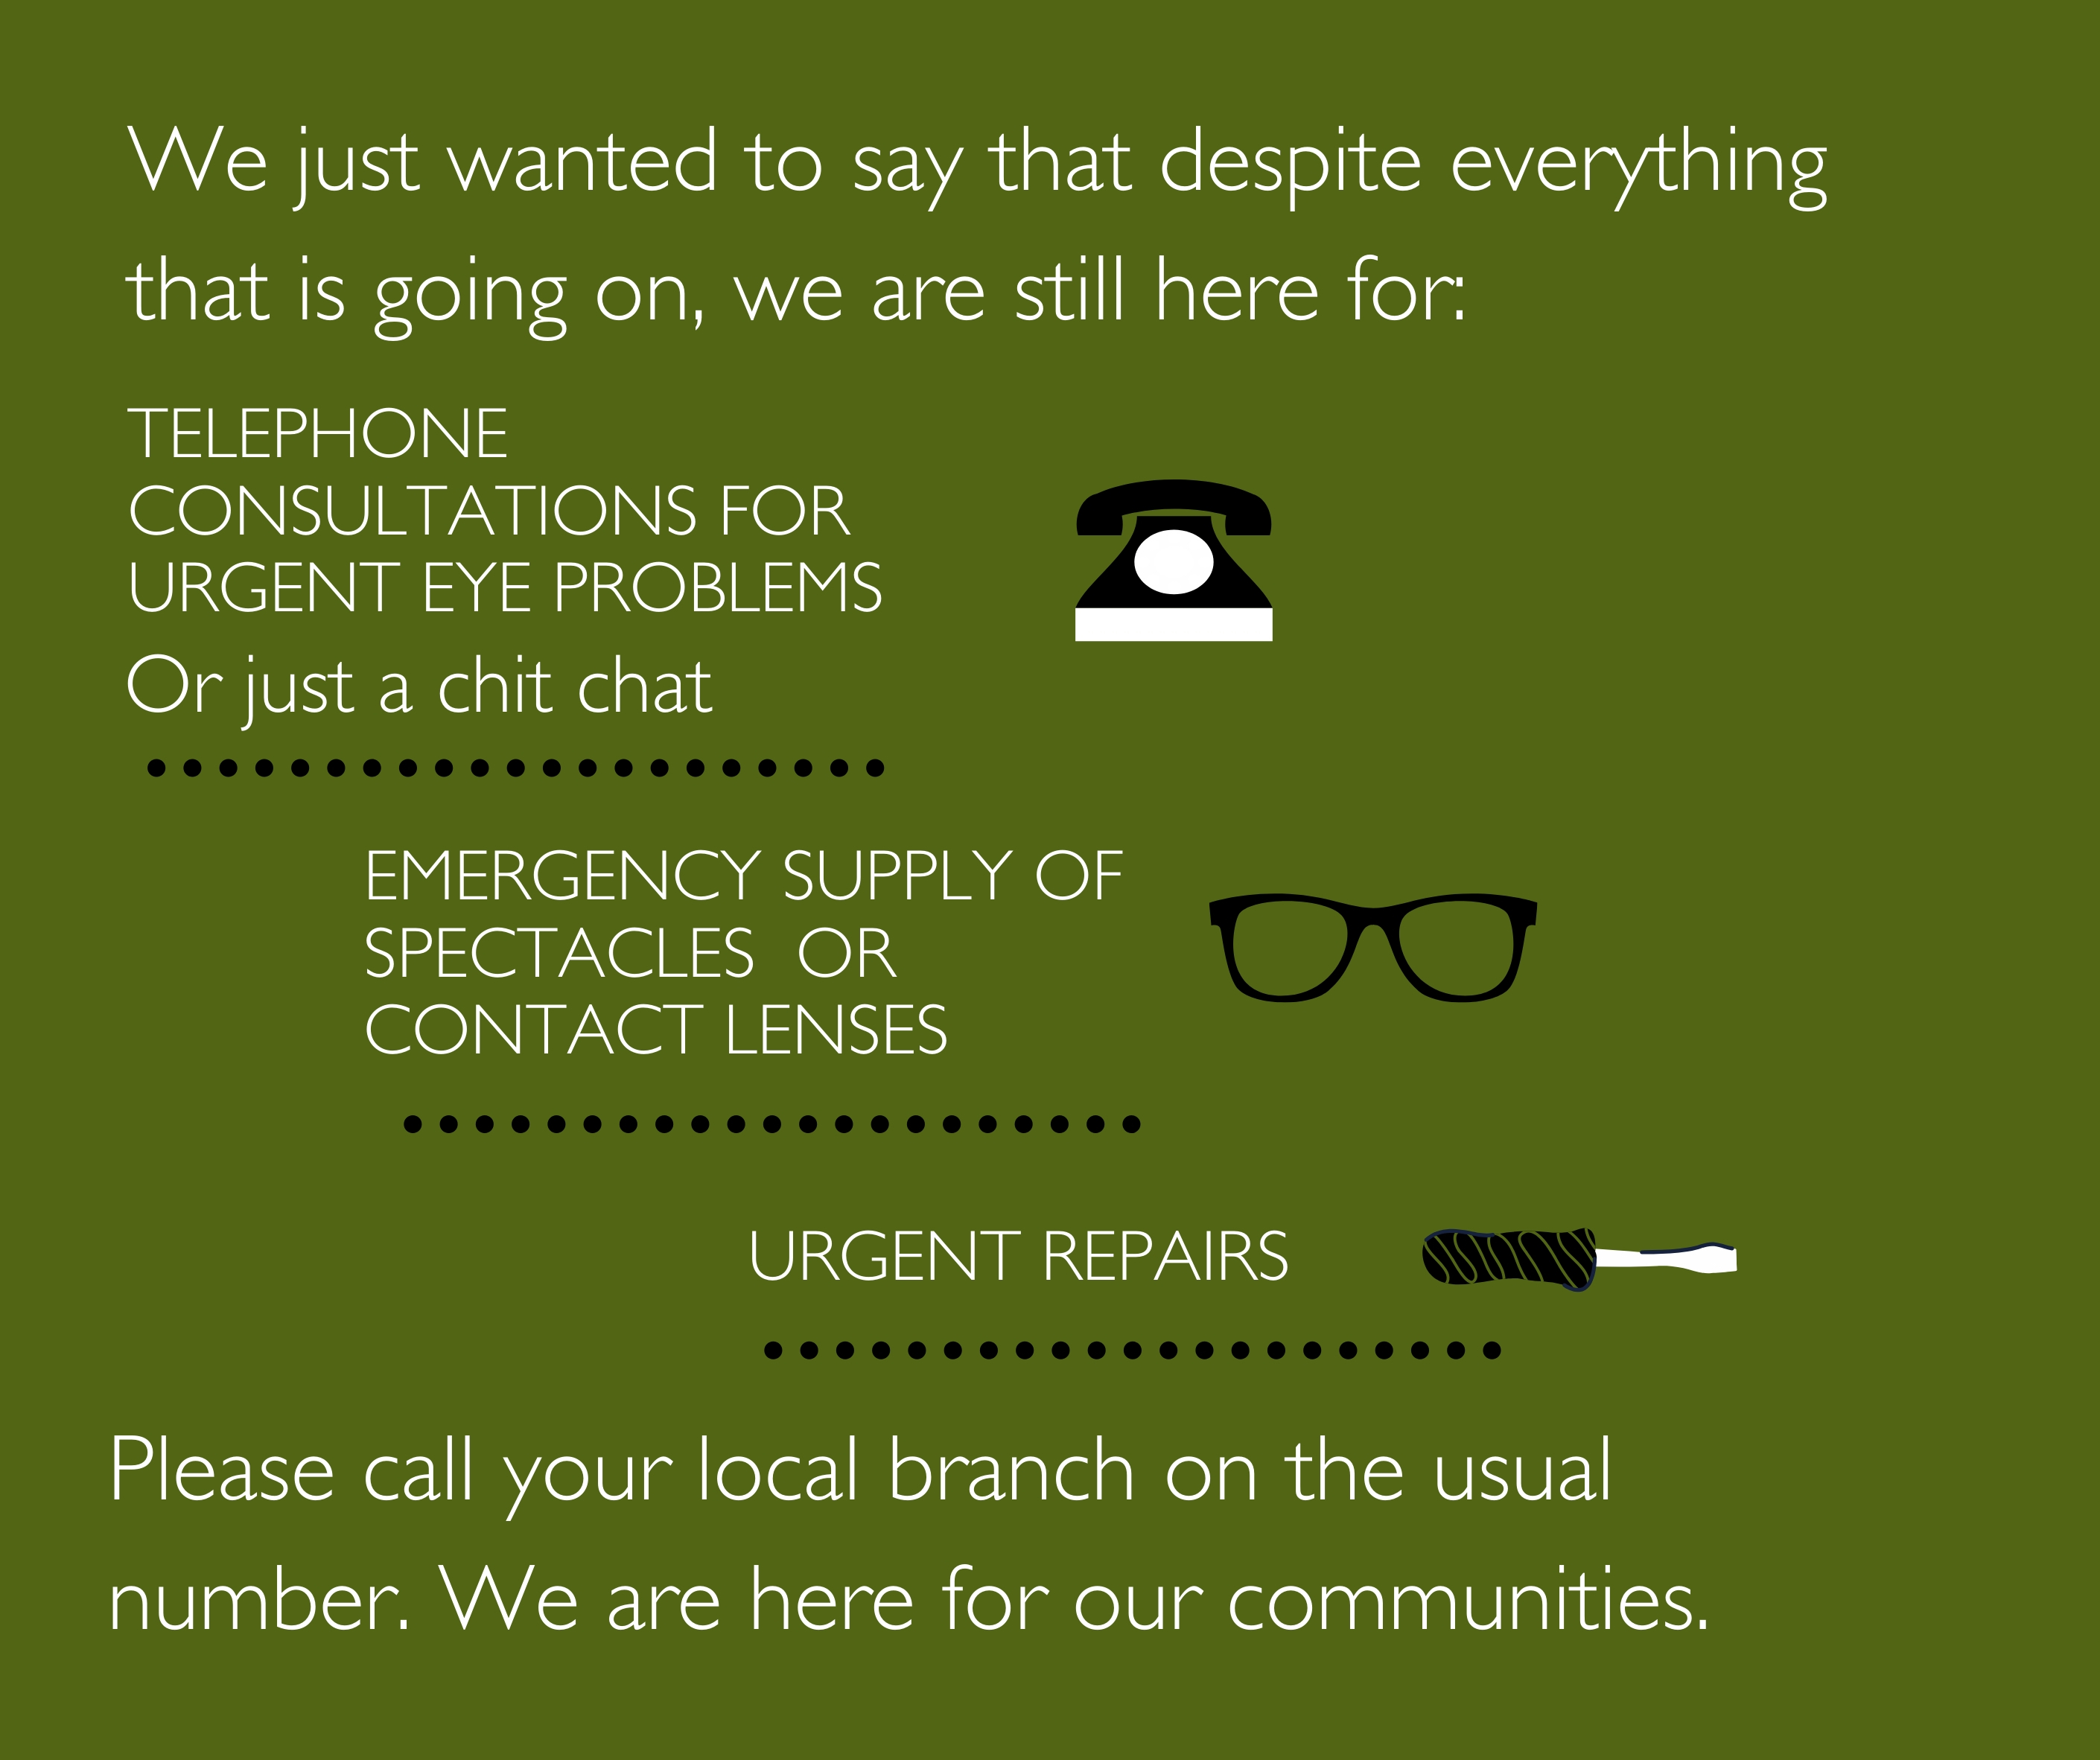 Essential and Urgent eye care services image